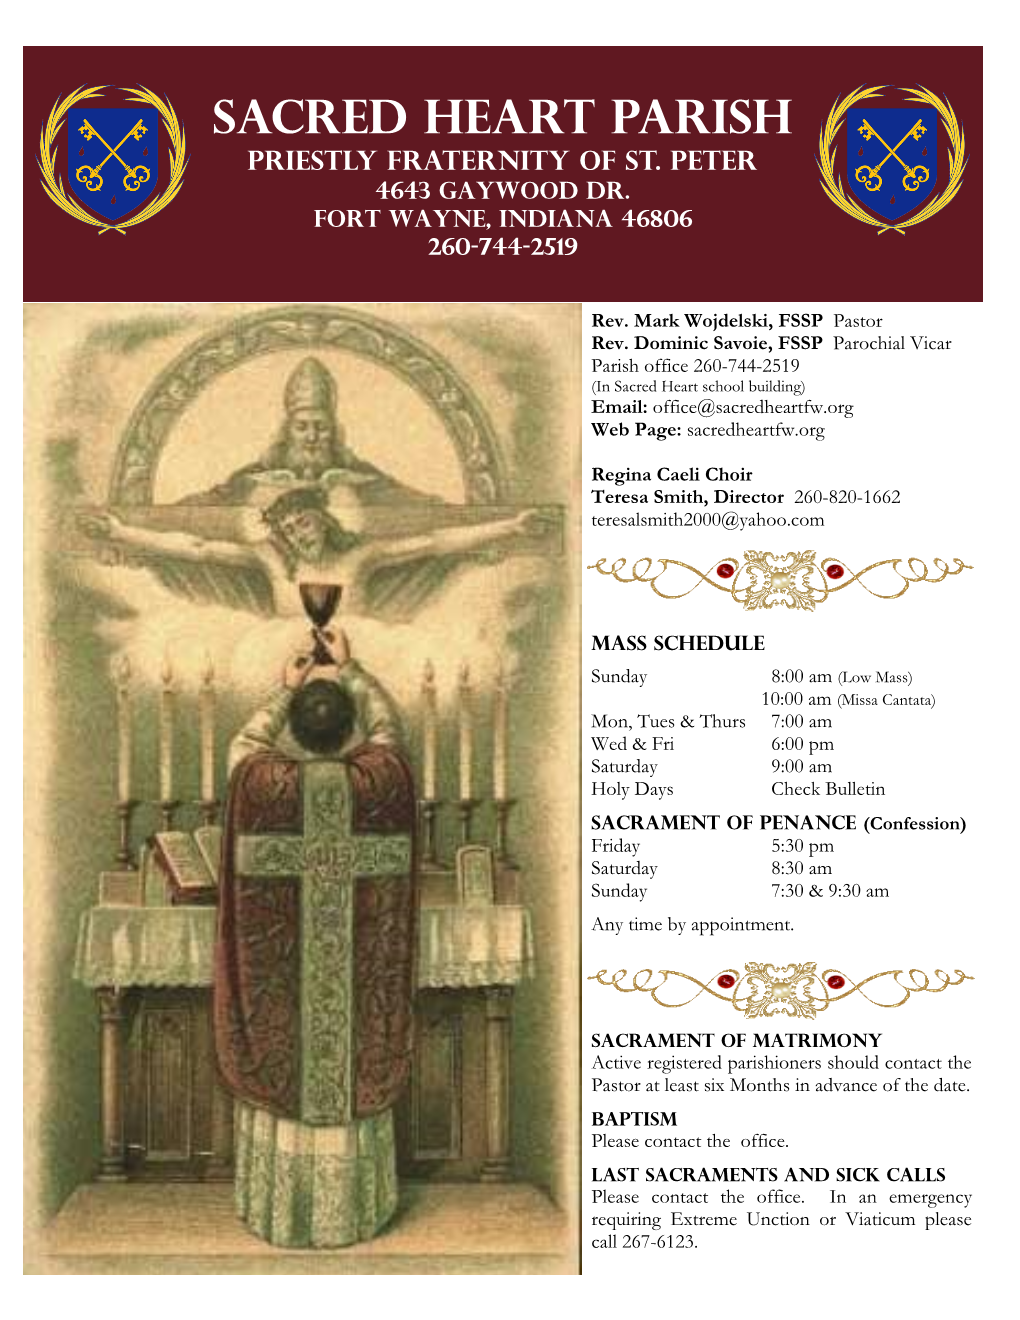 Sacred Heart Parish Priestly Fraternity of St. Peter 4643 Gaywood Dr